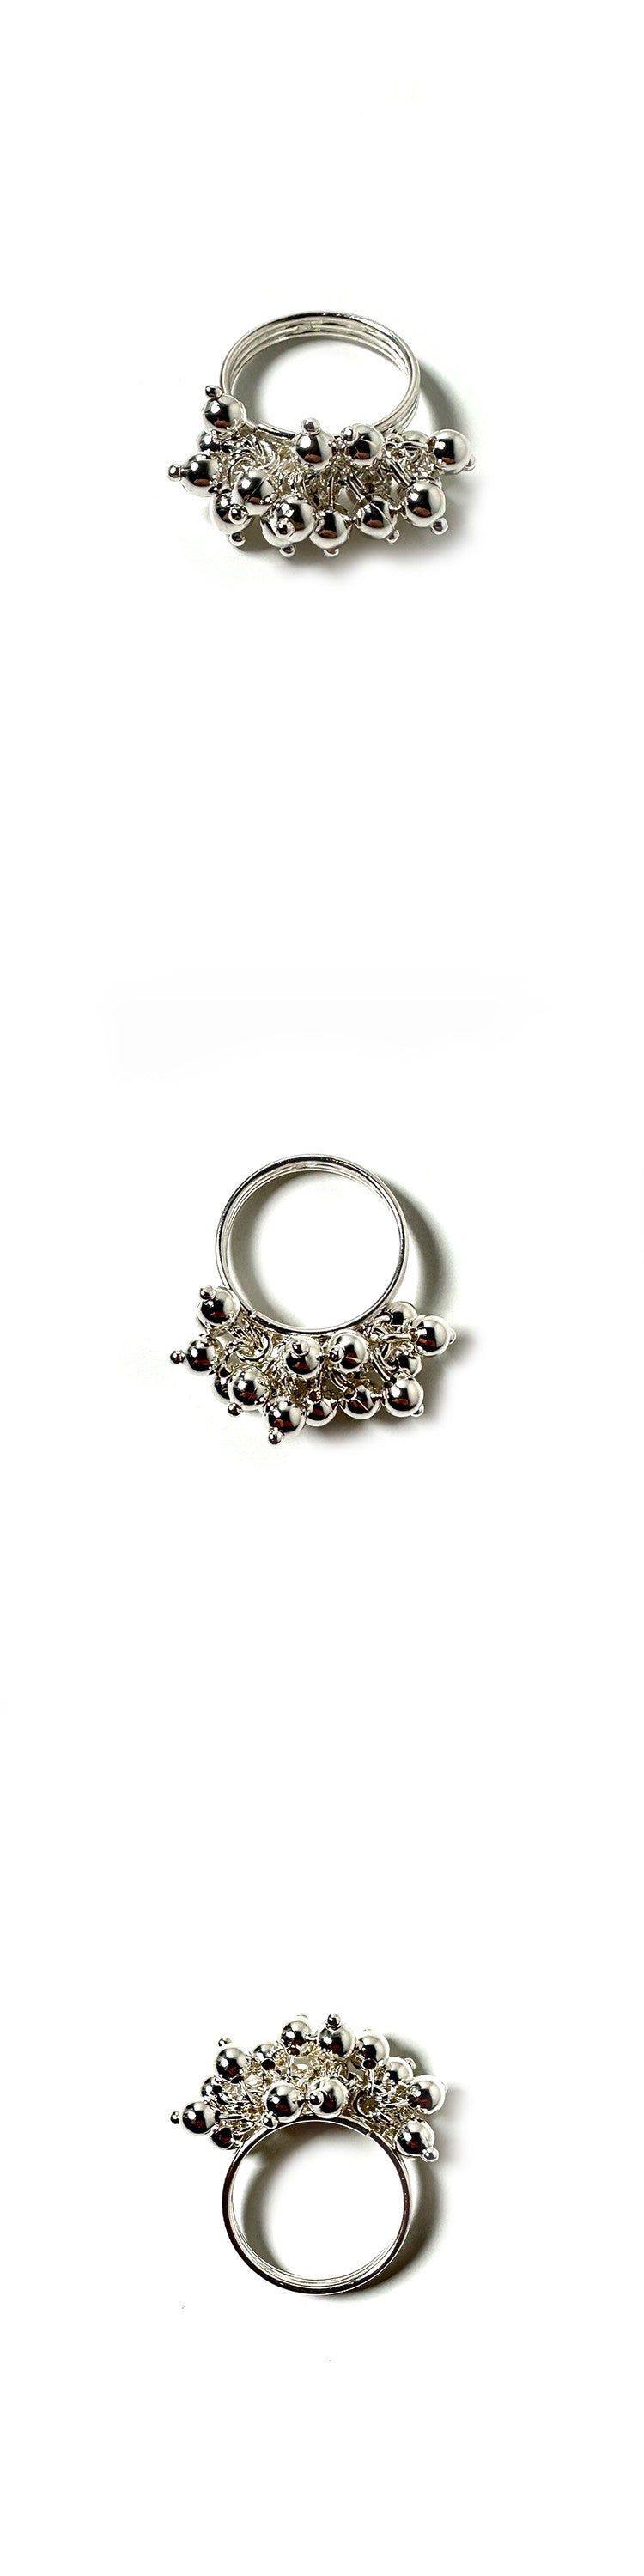 SILVER BUBBLE FLOWER RING